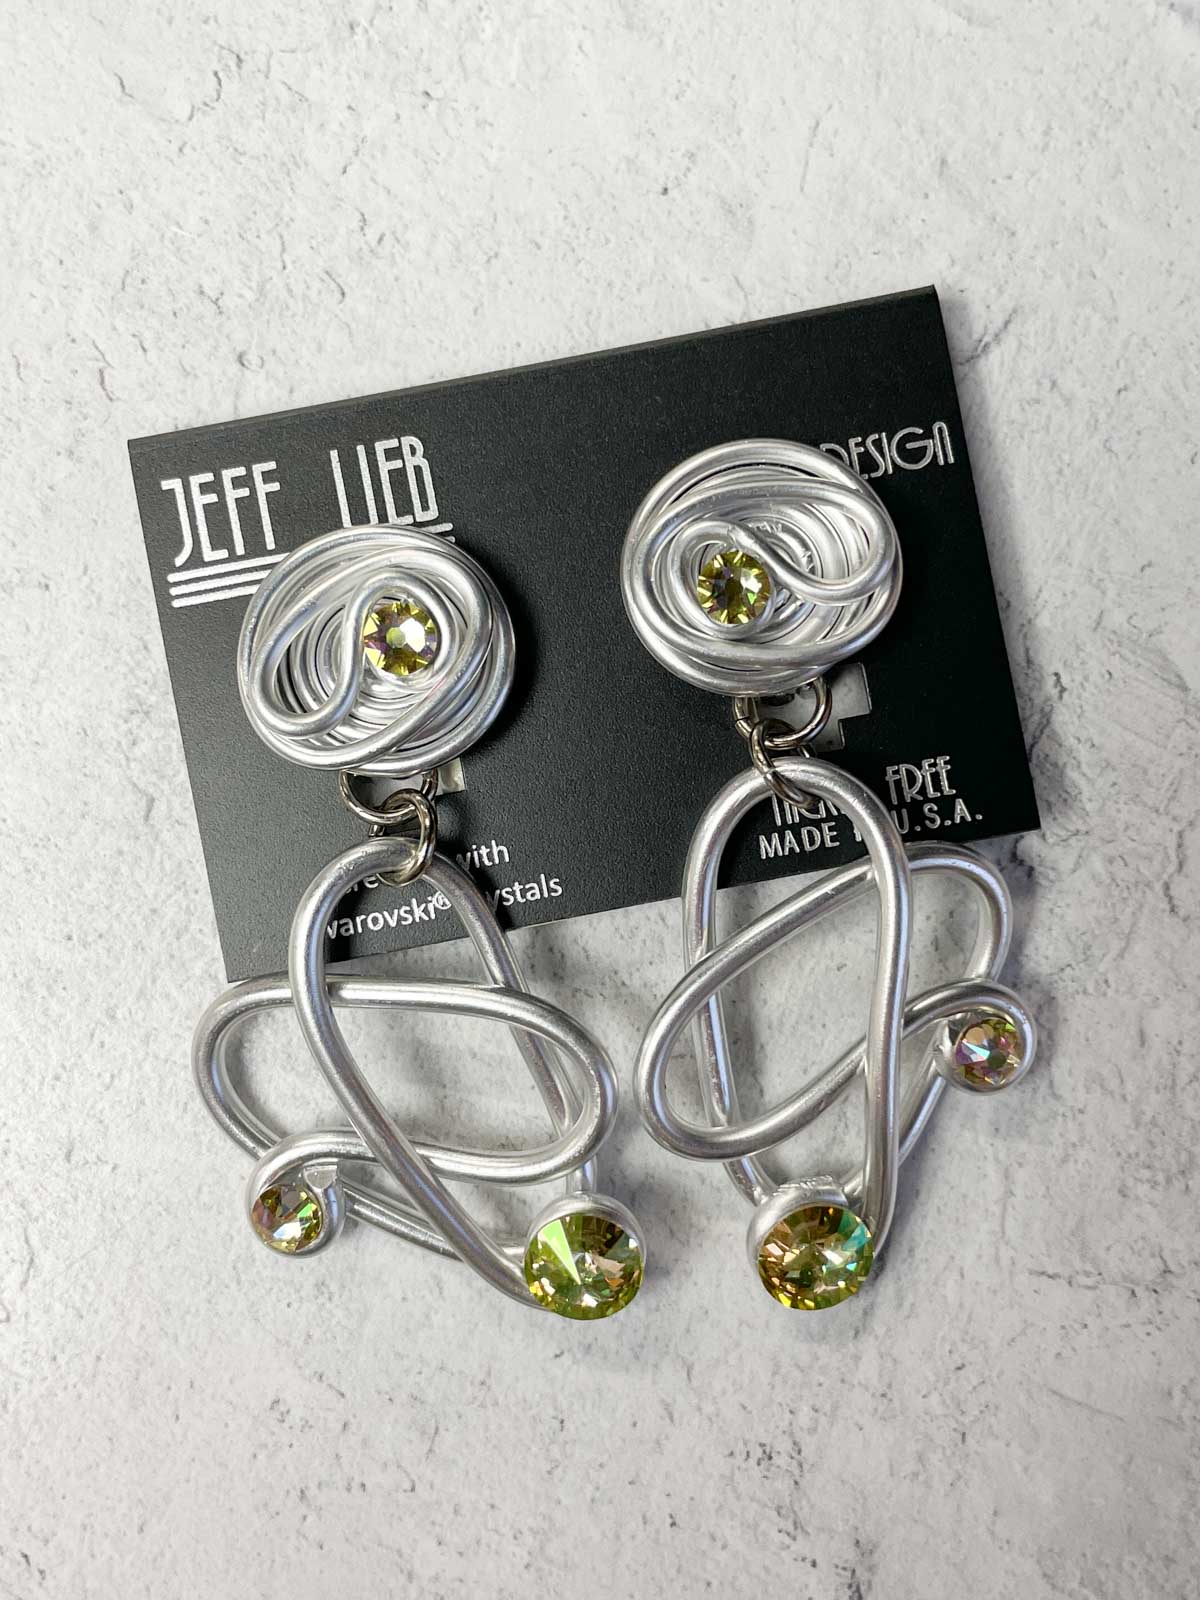 Jeff Lieb Total Design Jewelry Wire & Crystal Swirl Heart Drop Clip On Earrings, Silver/Iridescent Green - Statement Boutique